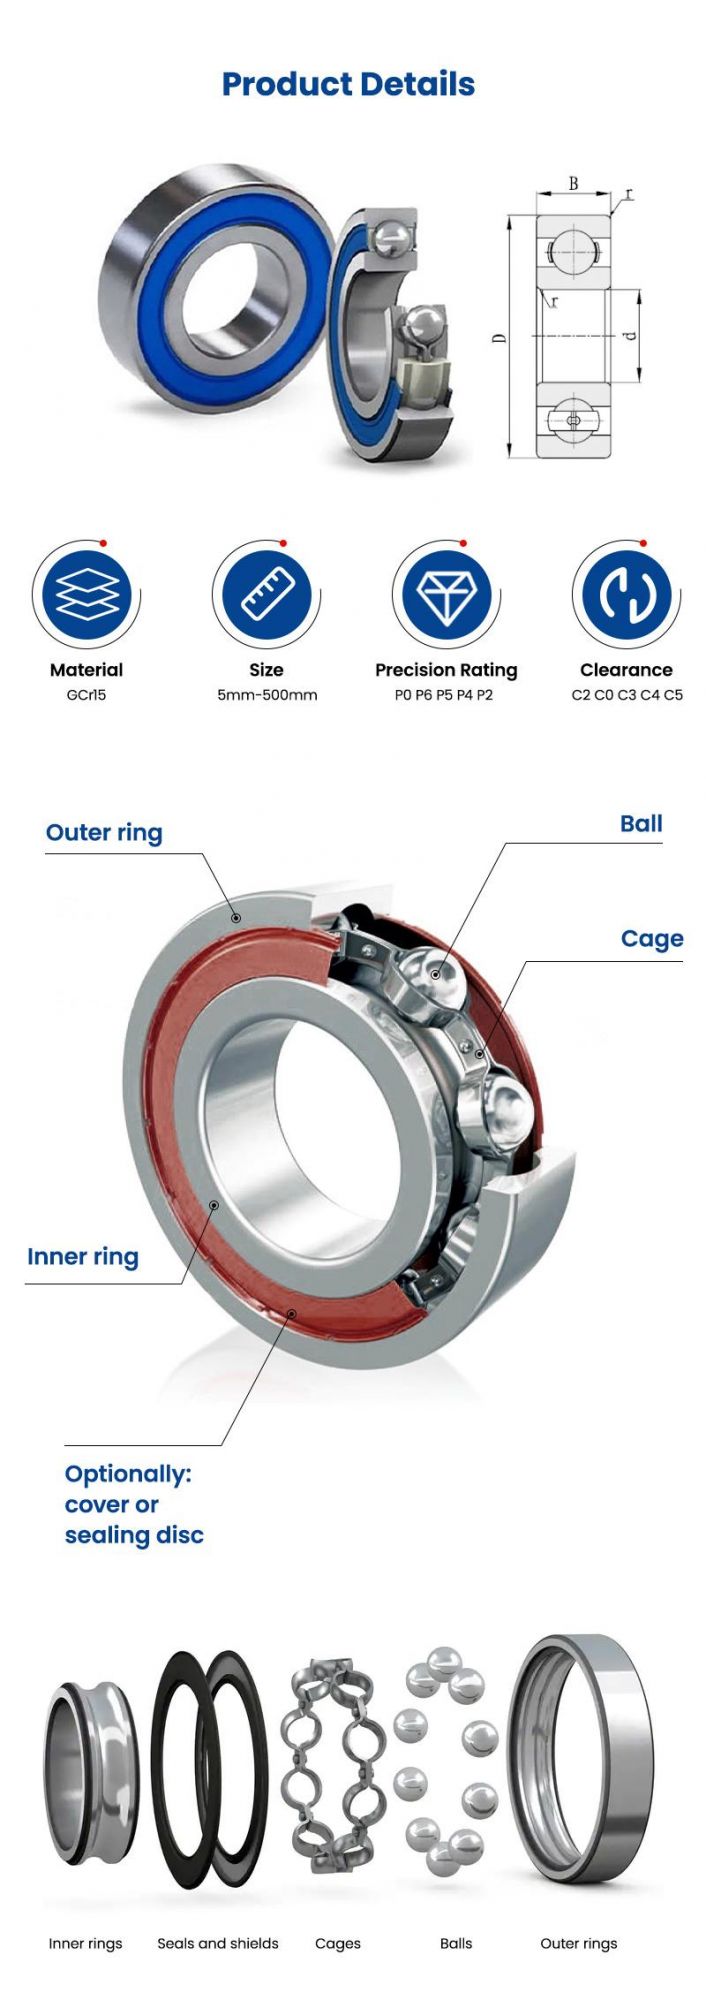 Xinhuo Bearing China Rolling Bearing Manufacturer Uxcell 68102RS Deep Groove Ball Bearings 50mm Inner 63032rszz Bearing Ball Deep Groove Bearing